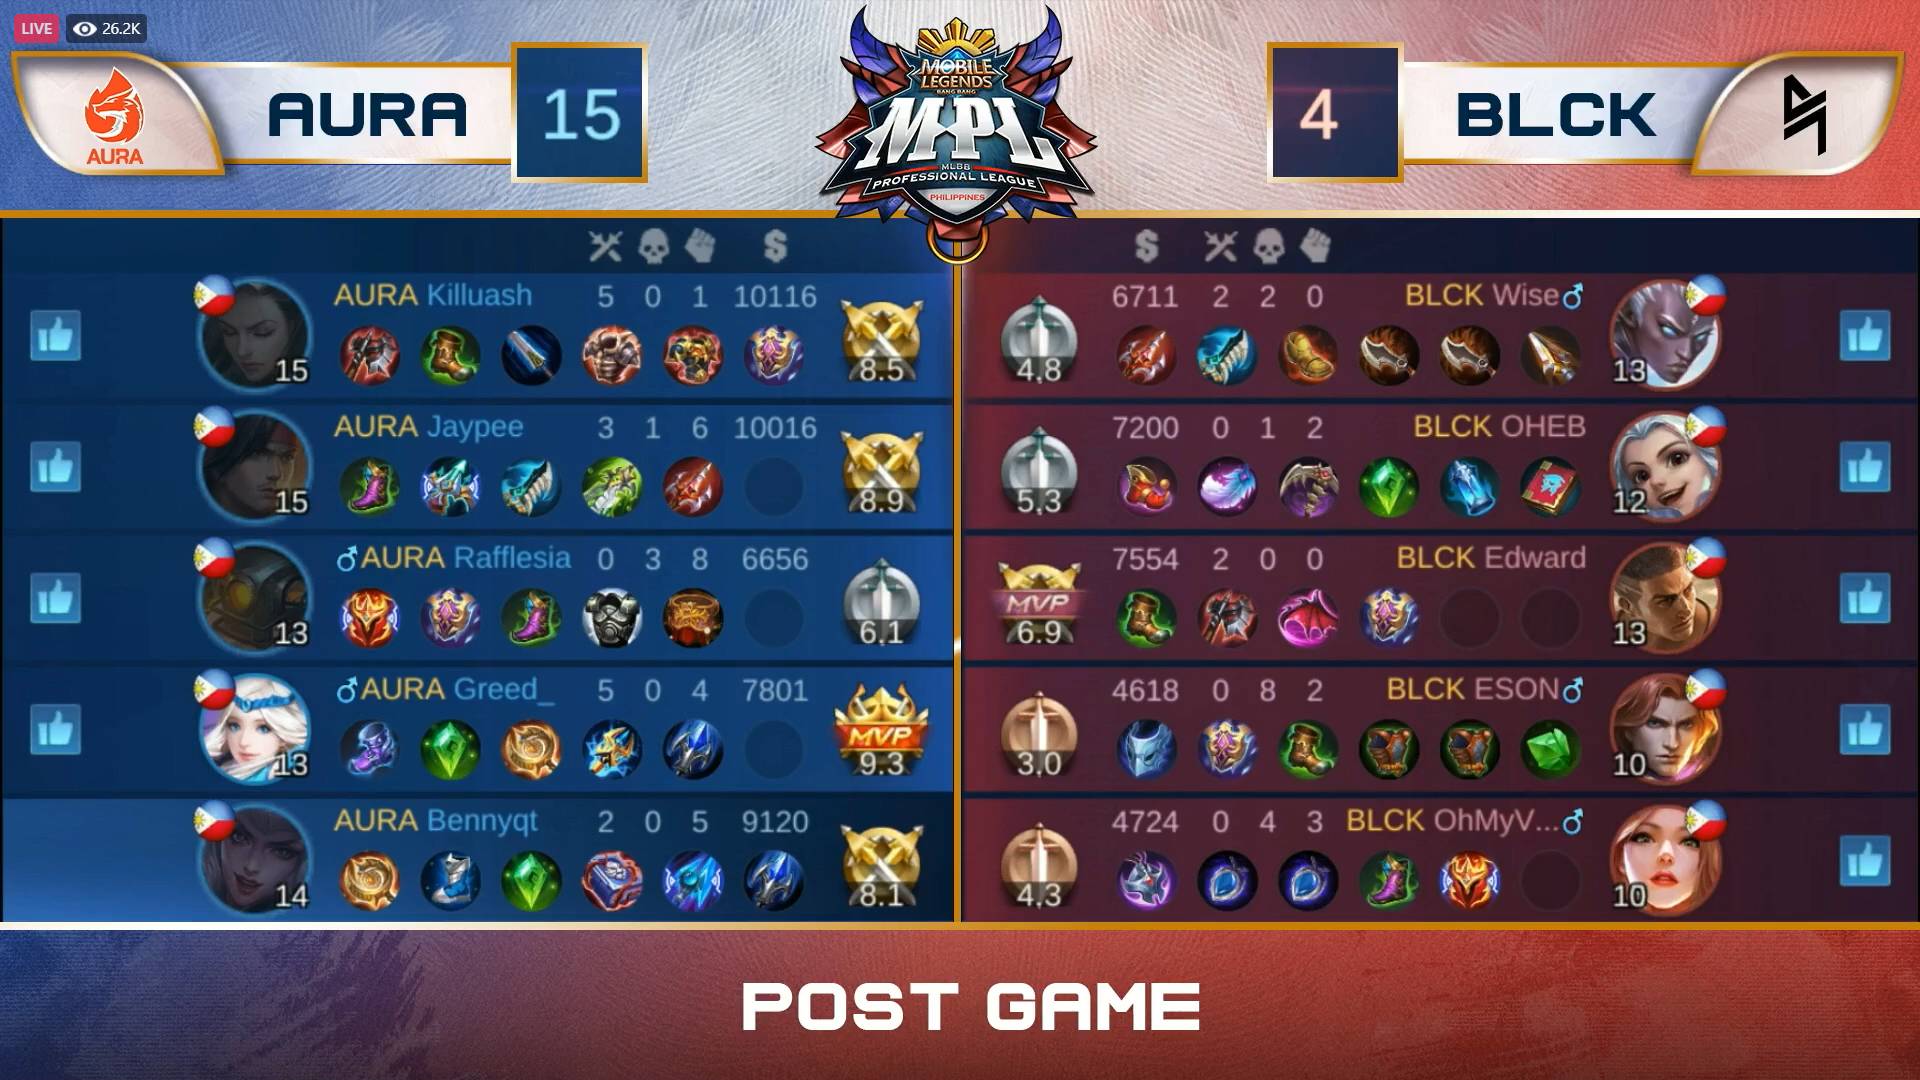 MPL-PH-7-Blacklist-def-Aura-PH-Game-1 ESON powers Blacklist to come-from-behind win vs Aura PH in MPL-PH ESports Mobile Legends MPL-PH News  - philippine sports news